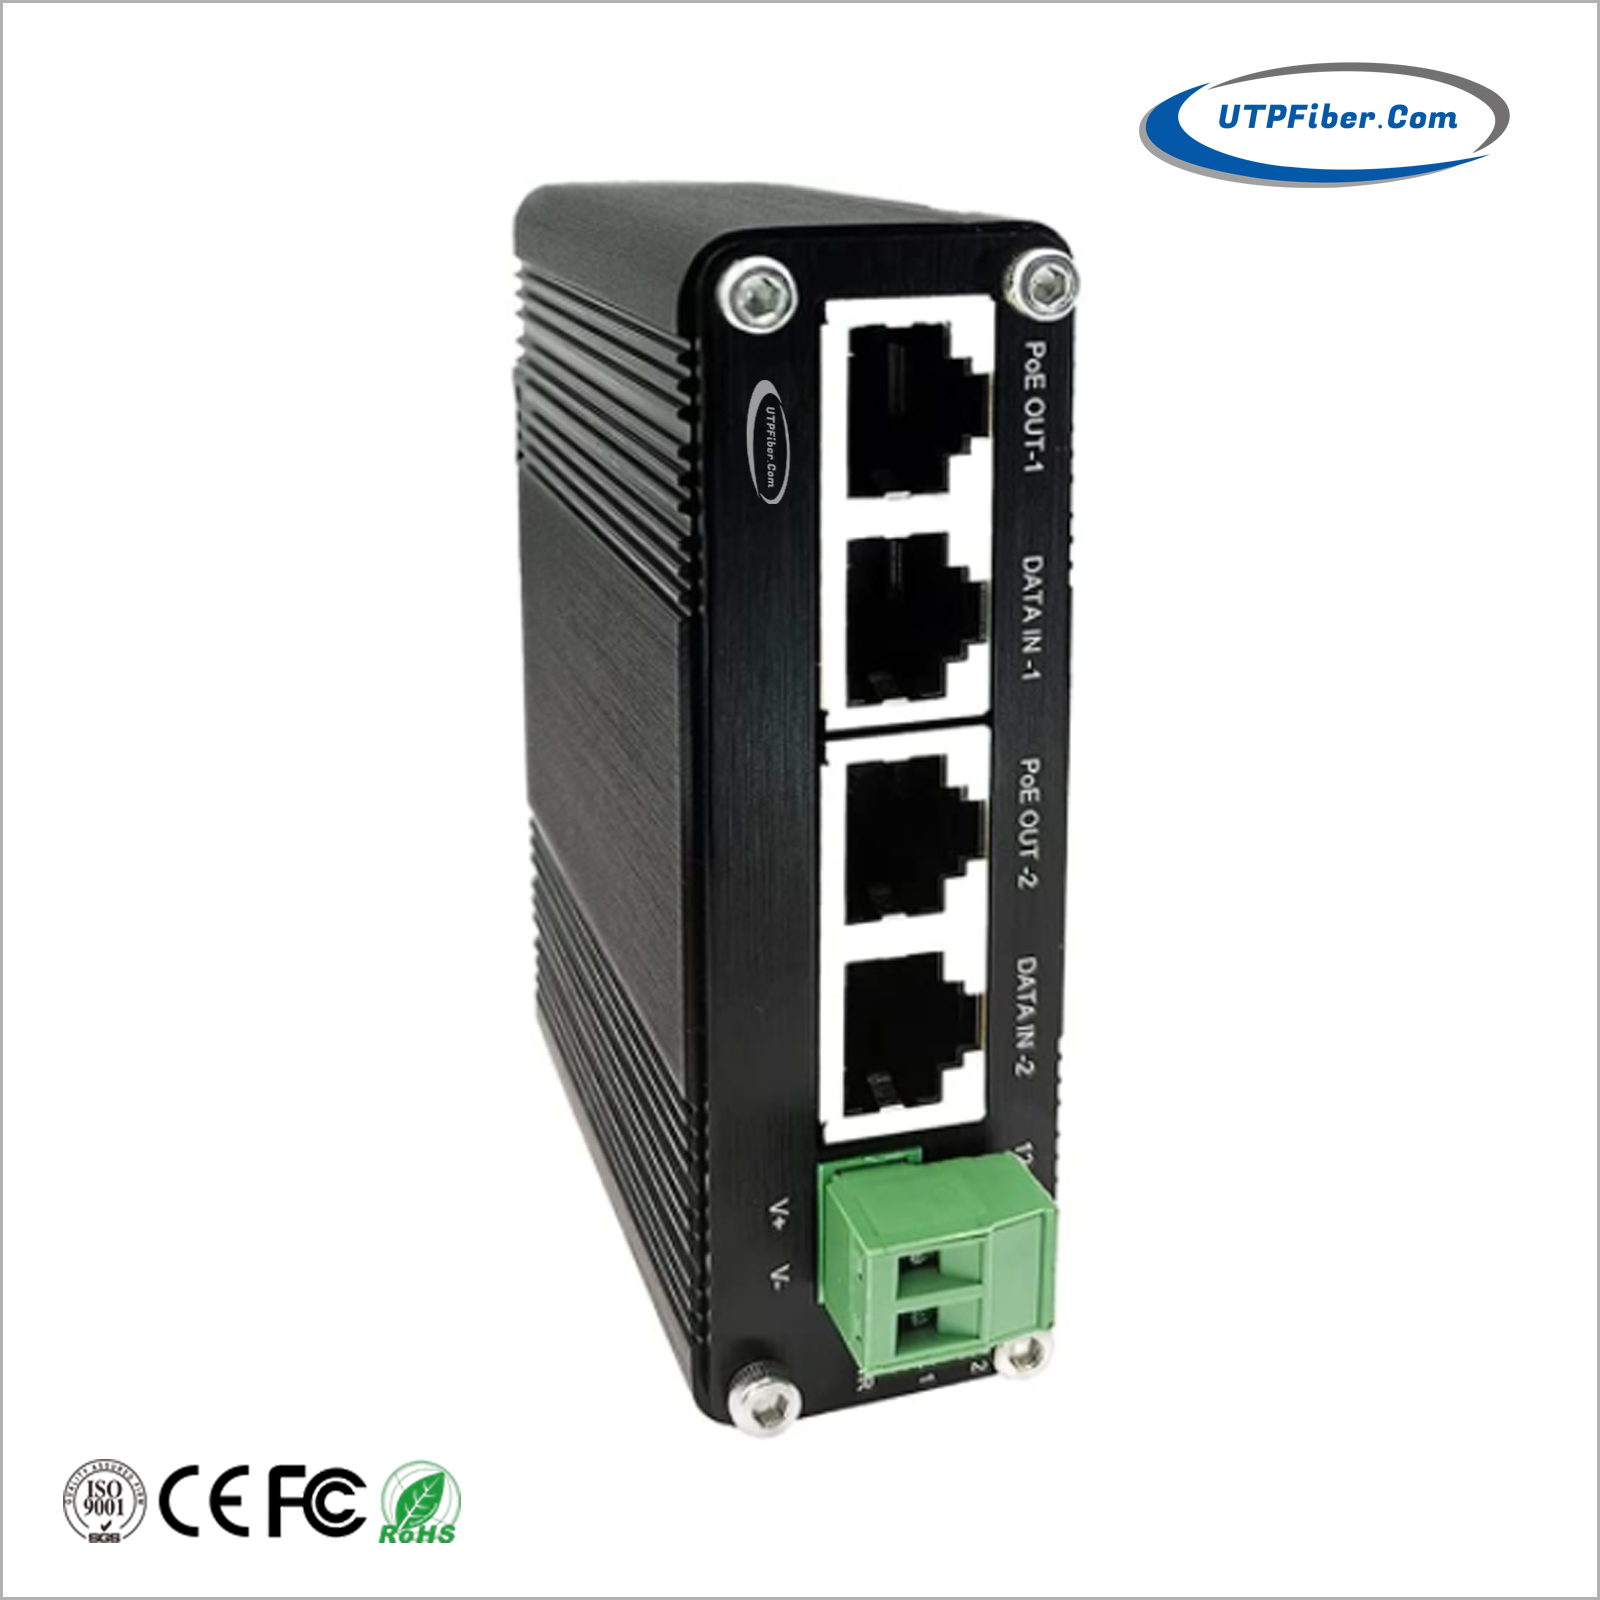 Industrial 2-Port 10/100/1000T 802.3at PoE+ Injector with 12~48VDC Power Input